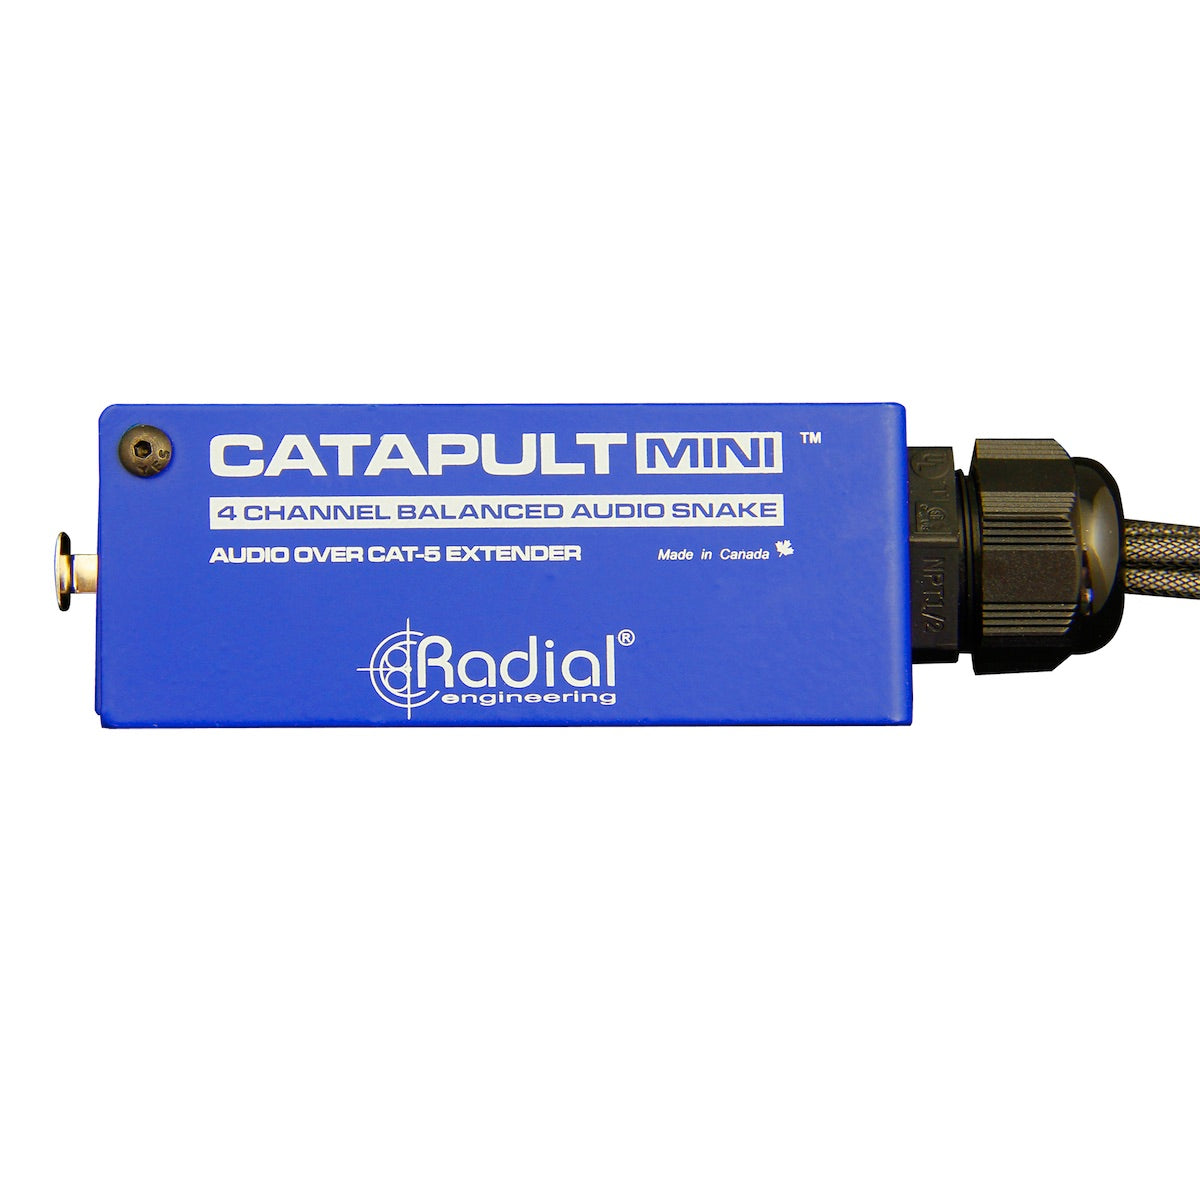 Radial Catapult Mini TX - Compact 4-Channel Cat 5 Audio Snake Transmitter, top